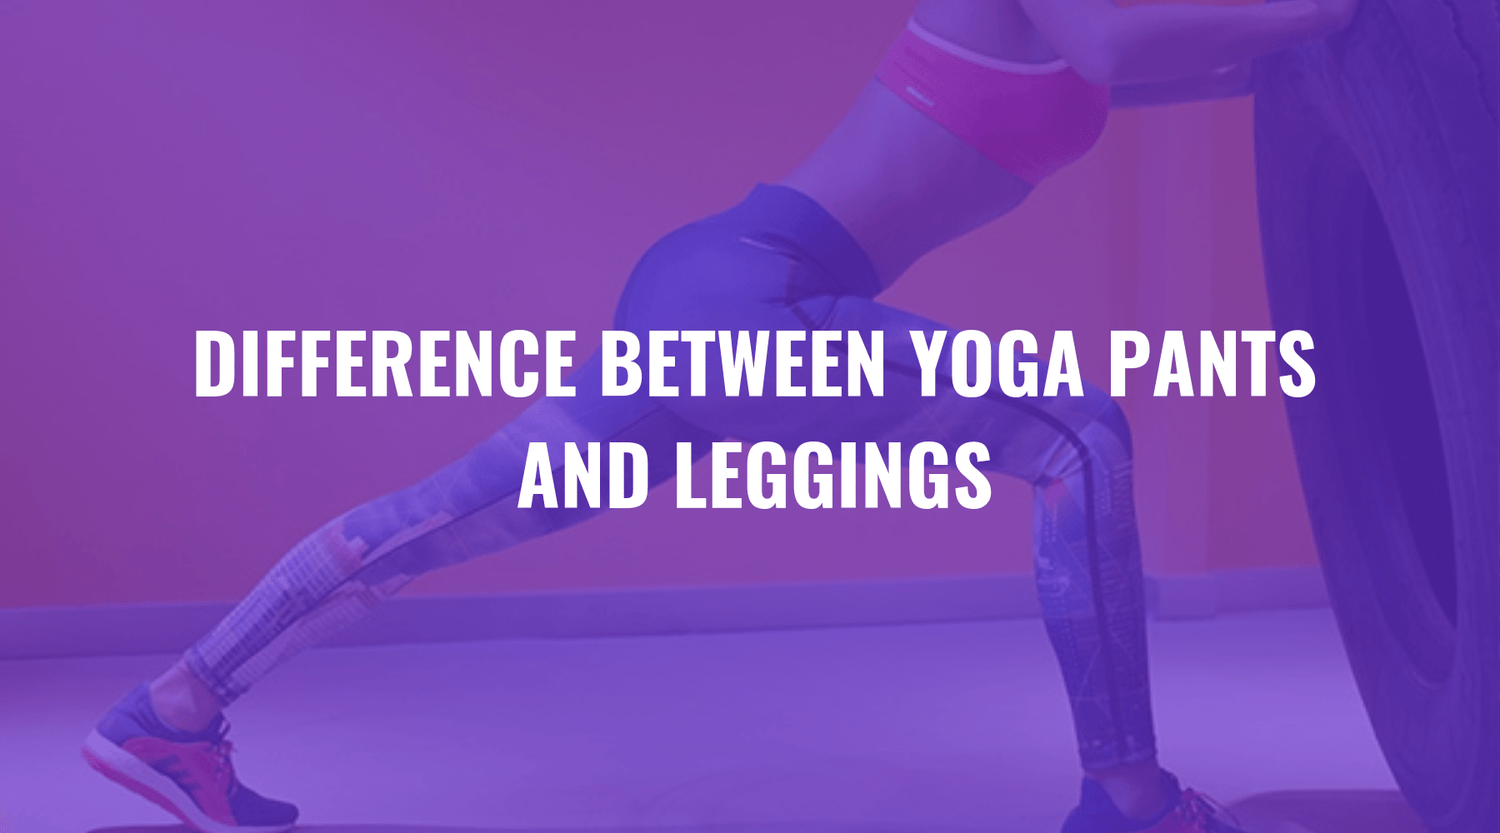 Difference Between Yoga Pants and Leggings